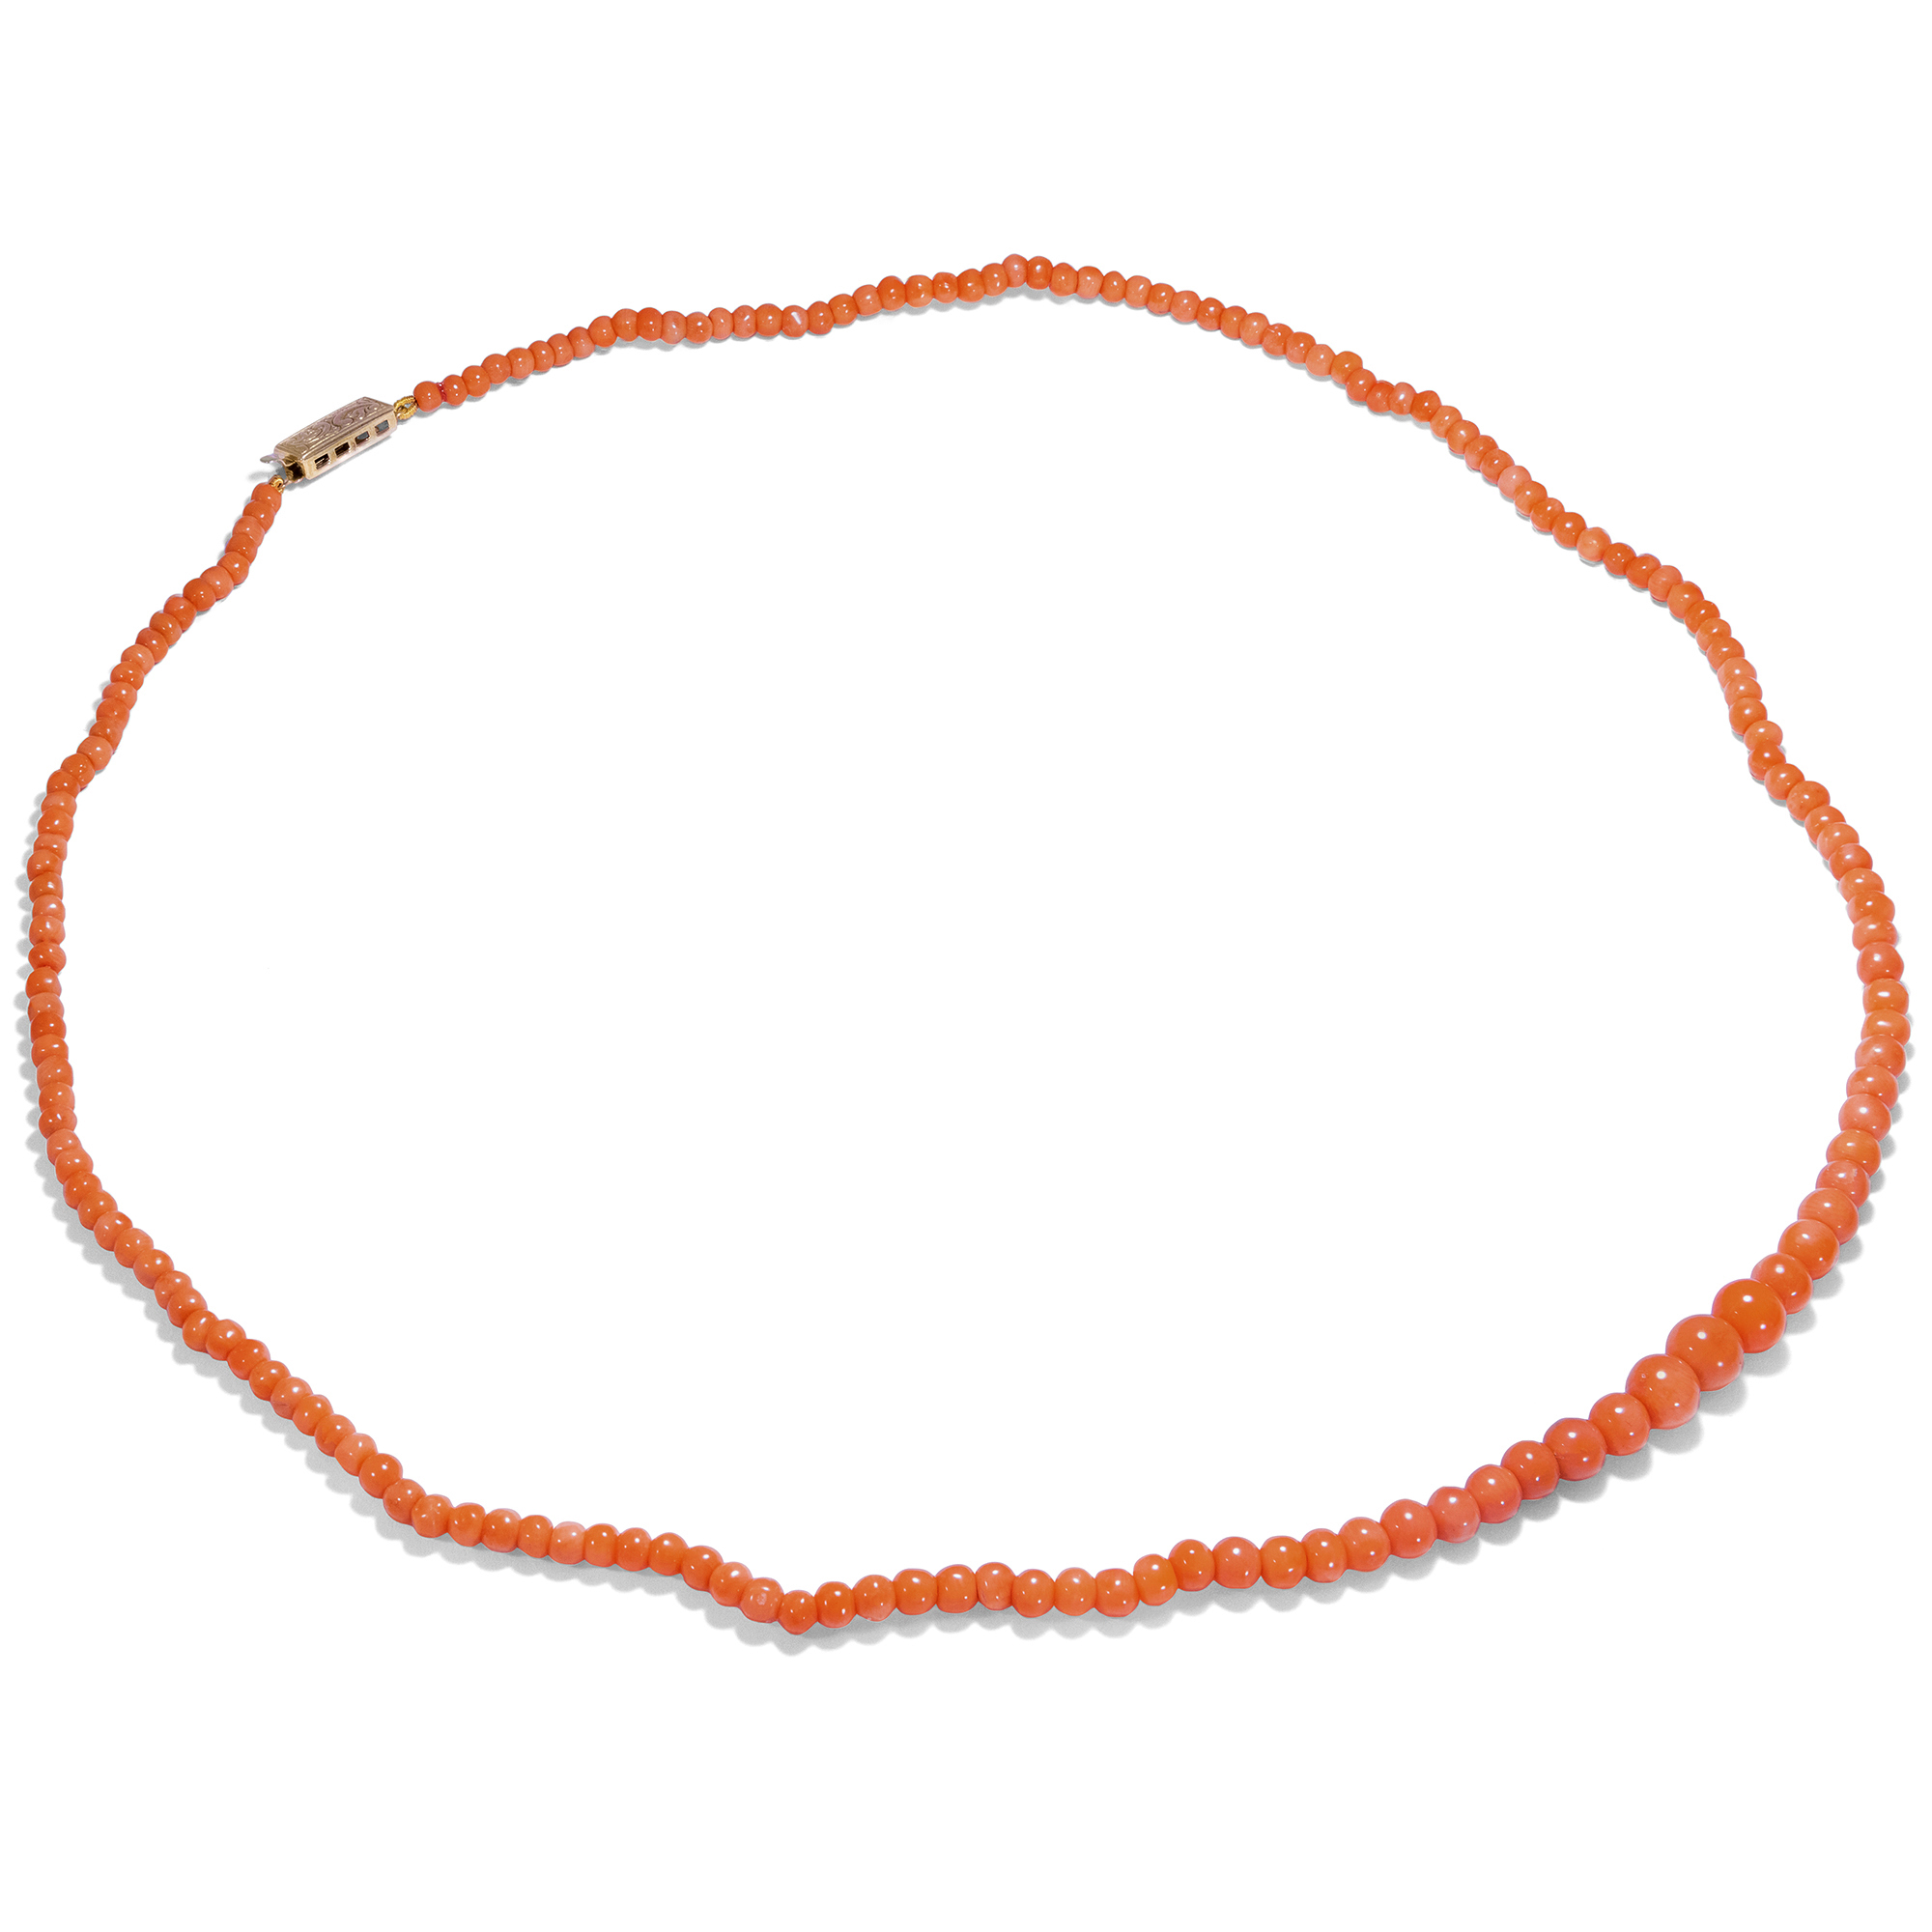 Antique Hand Cut Salmon Coral Necklace with Modern Clasp, circa 1900/2020